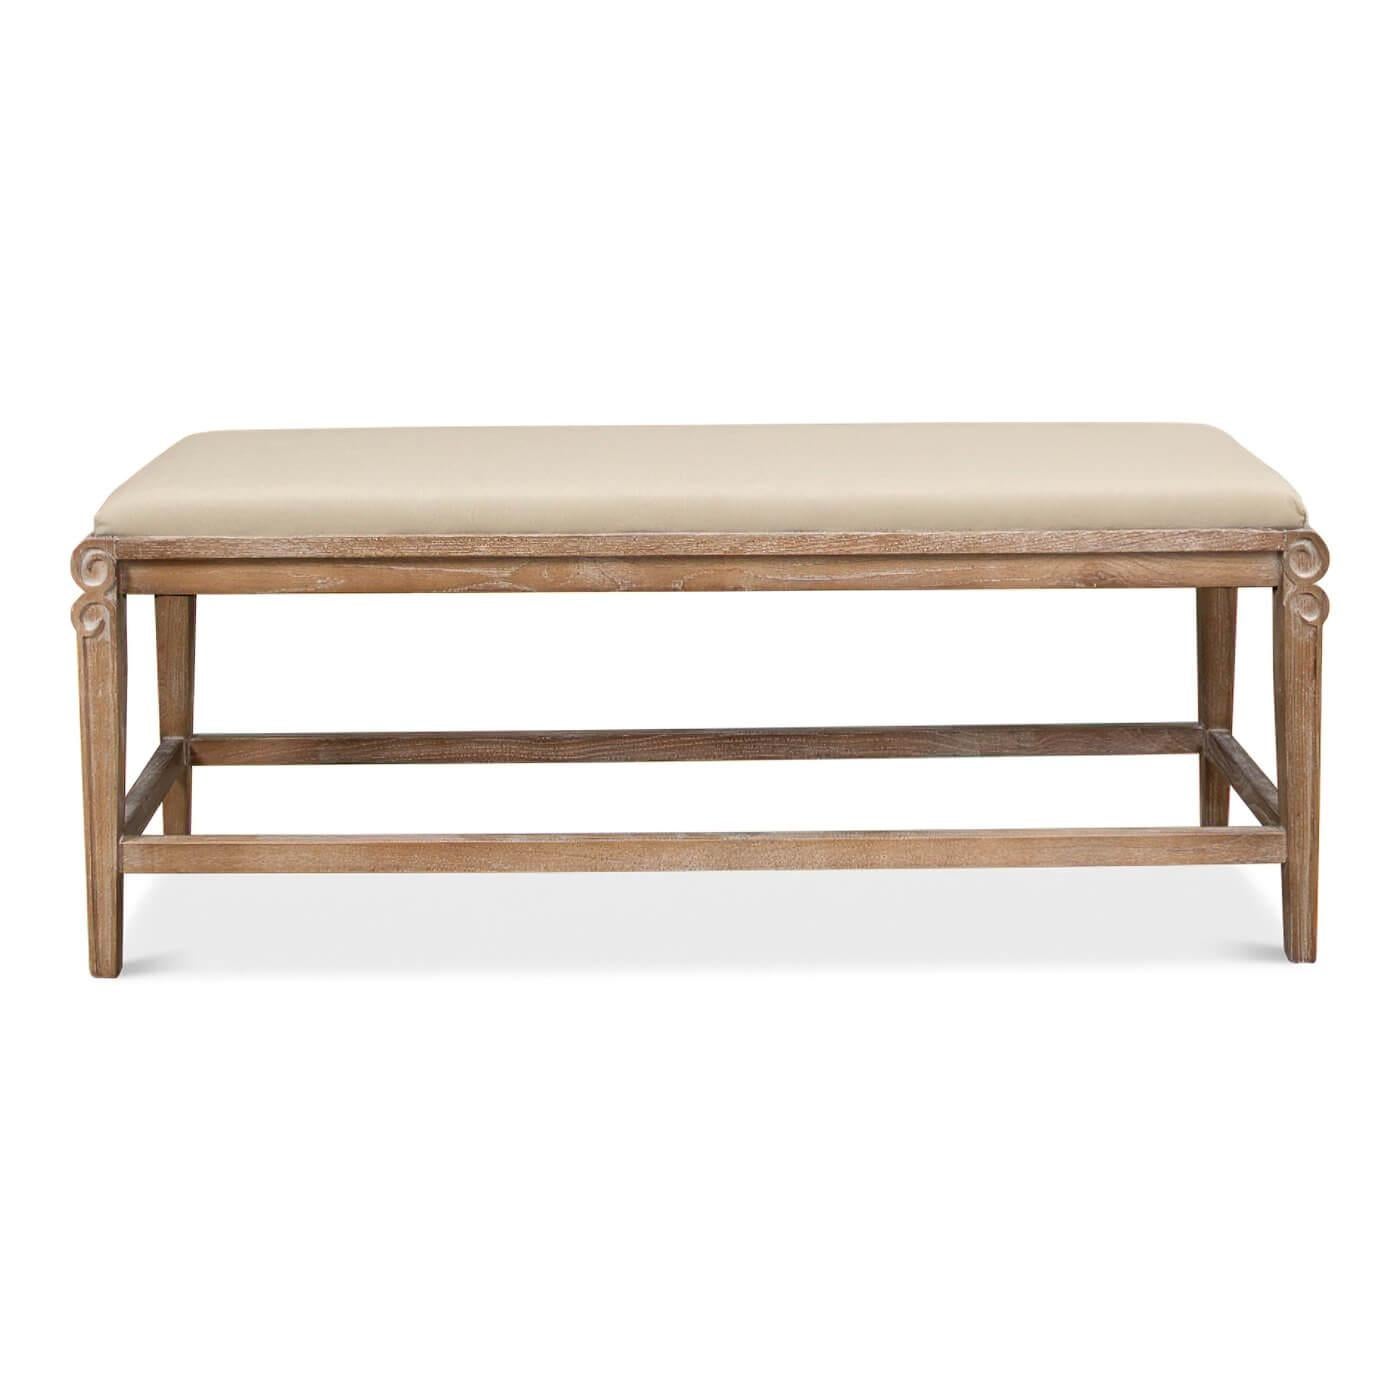 A modern whitewash and linen upholstered bench. This elegant bench has a beige linen-covered cushioned top and sits on a whitewashed oak frame with graceful lines.

Crafted in neutral colors with a versatile design, this bench can easily be enjoyed